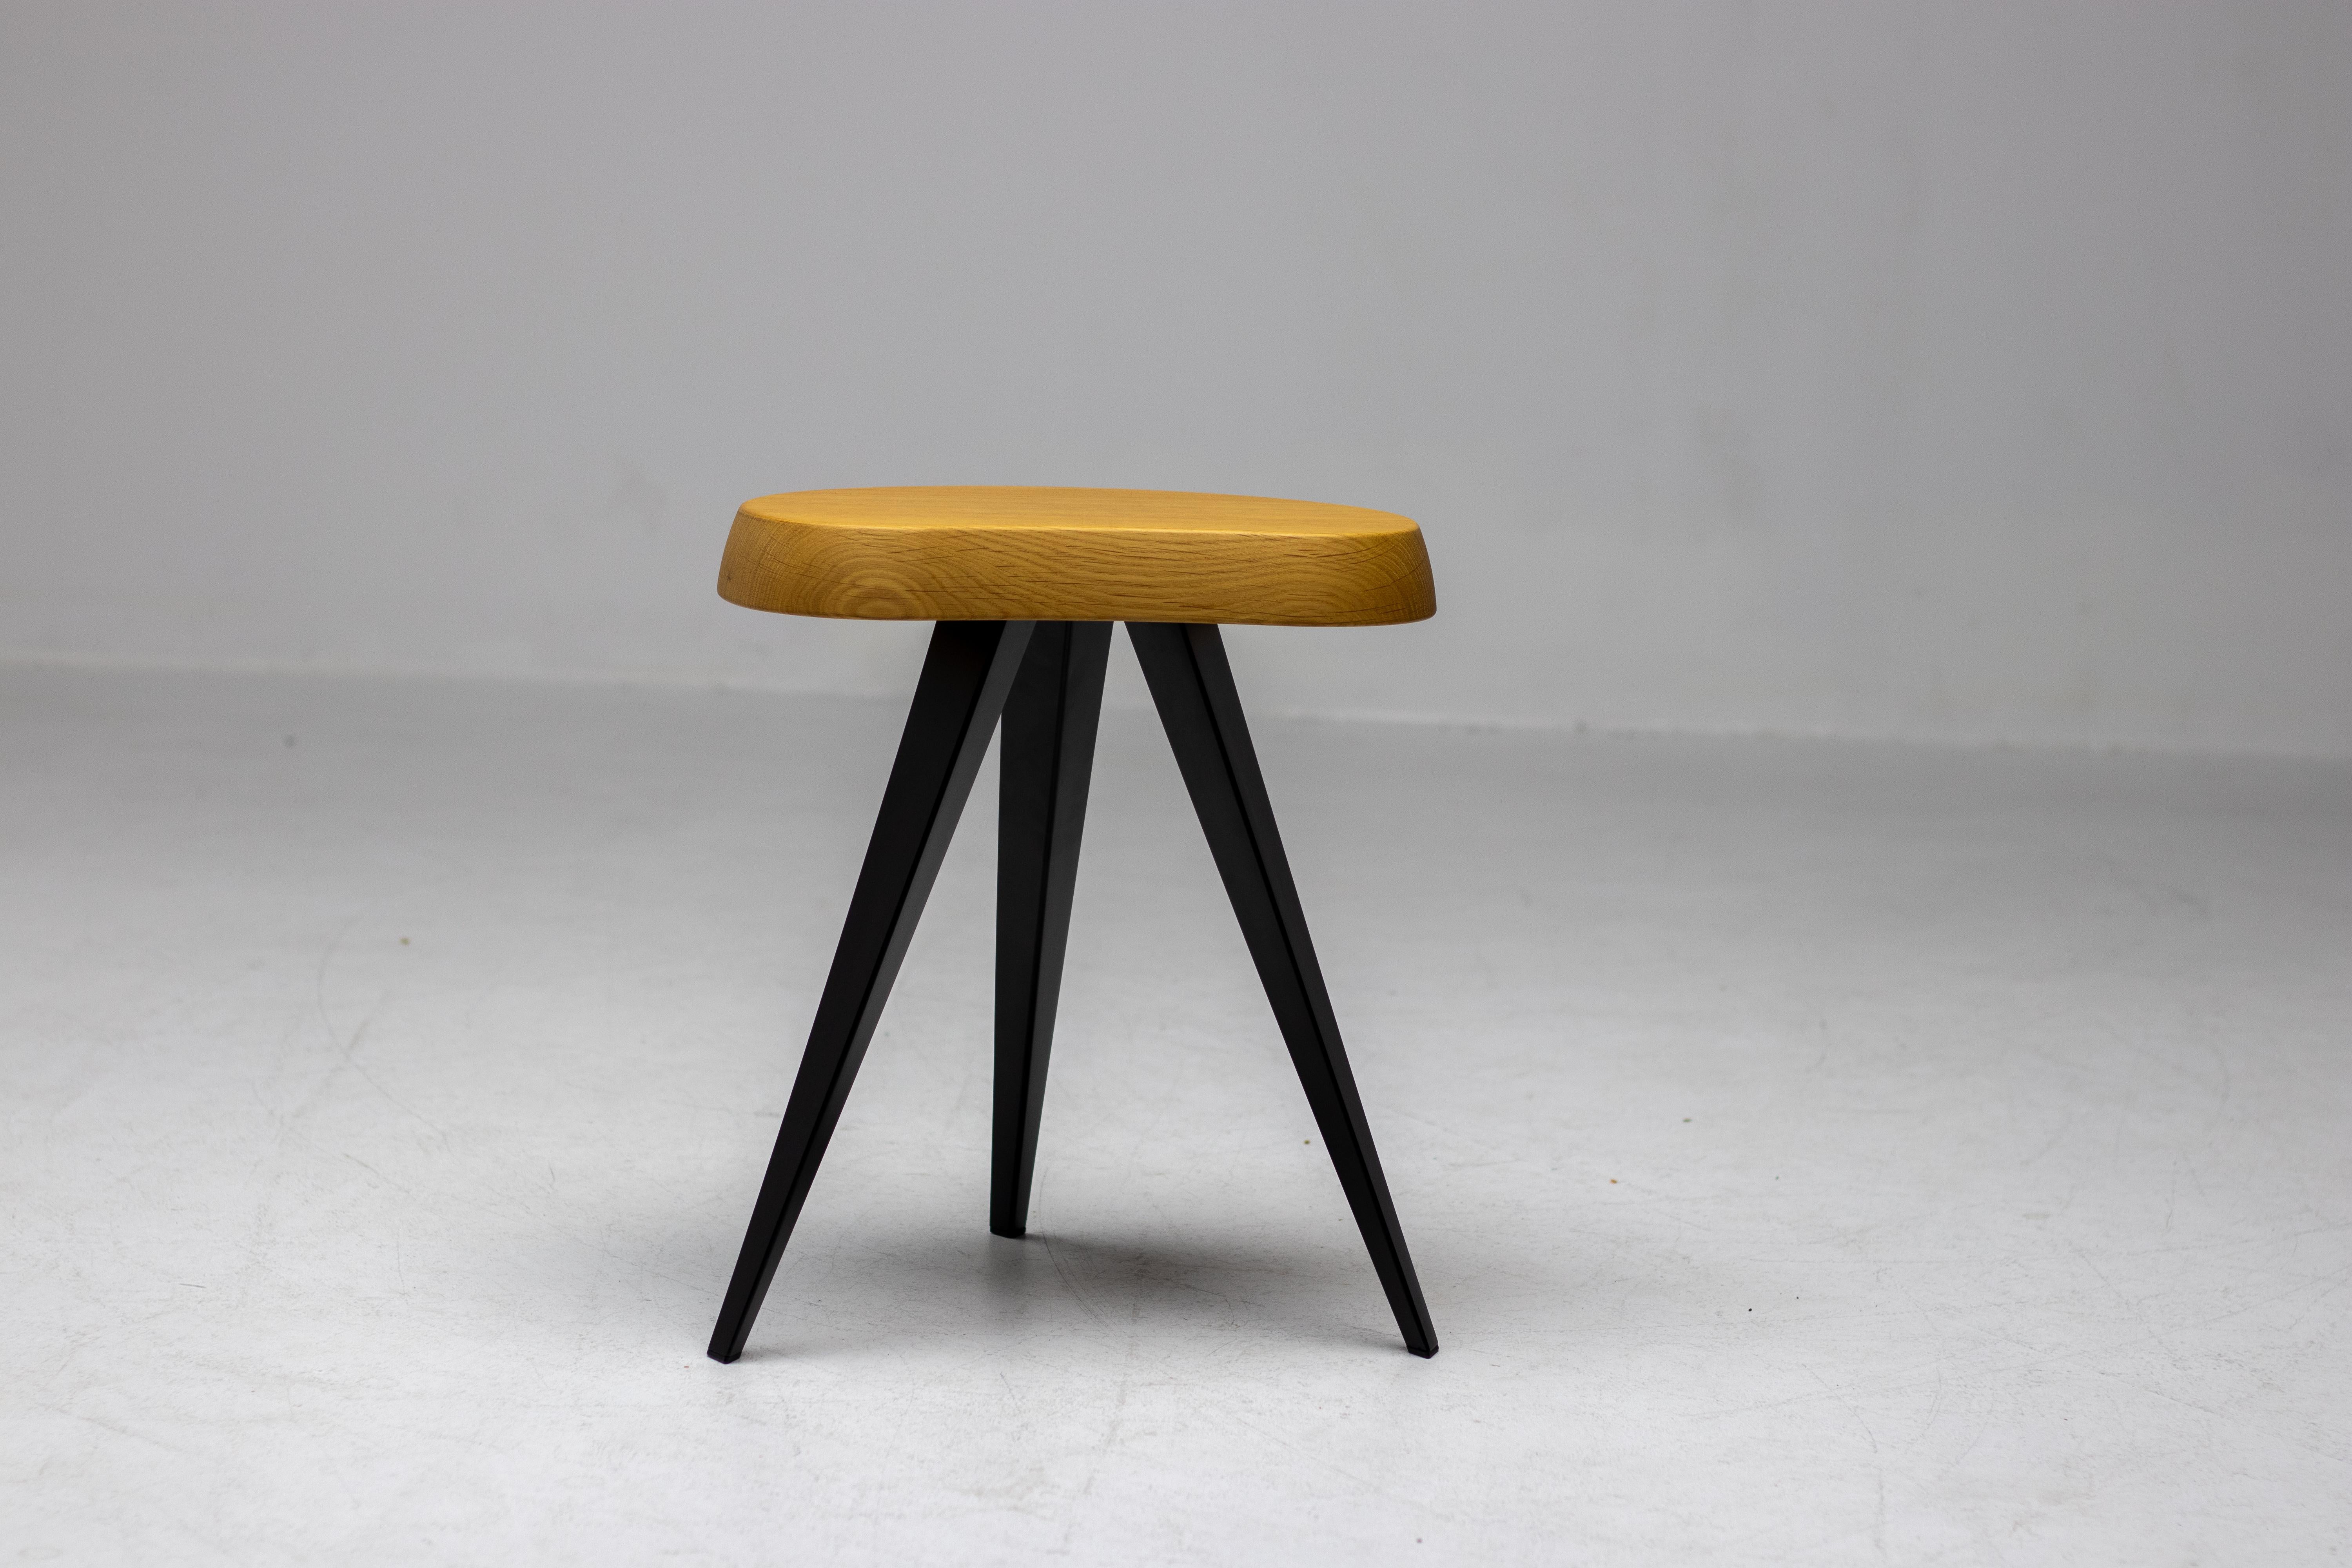 Stool designed by Charlotte Perriand circa 1952. Manufactured in 2019 by Cassina, Italy. 
Lovingly cared for by an avid collector of Jean Prouvé, Le Corbusier and Charlotte Perriand furniture.
Desirable very low number, one of the very first stools